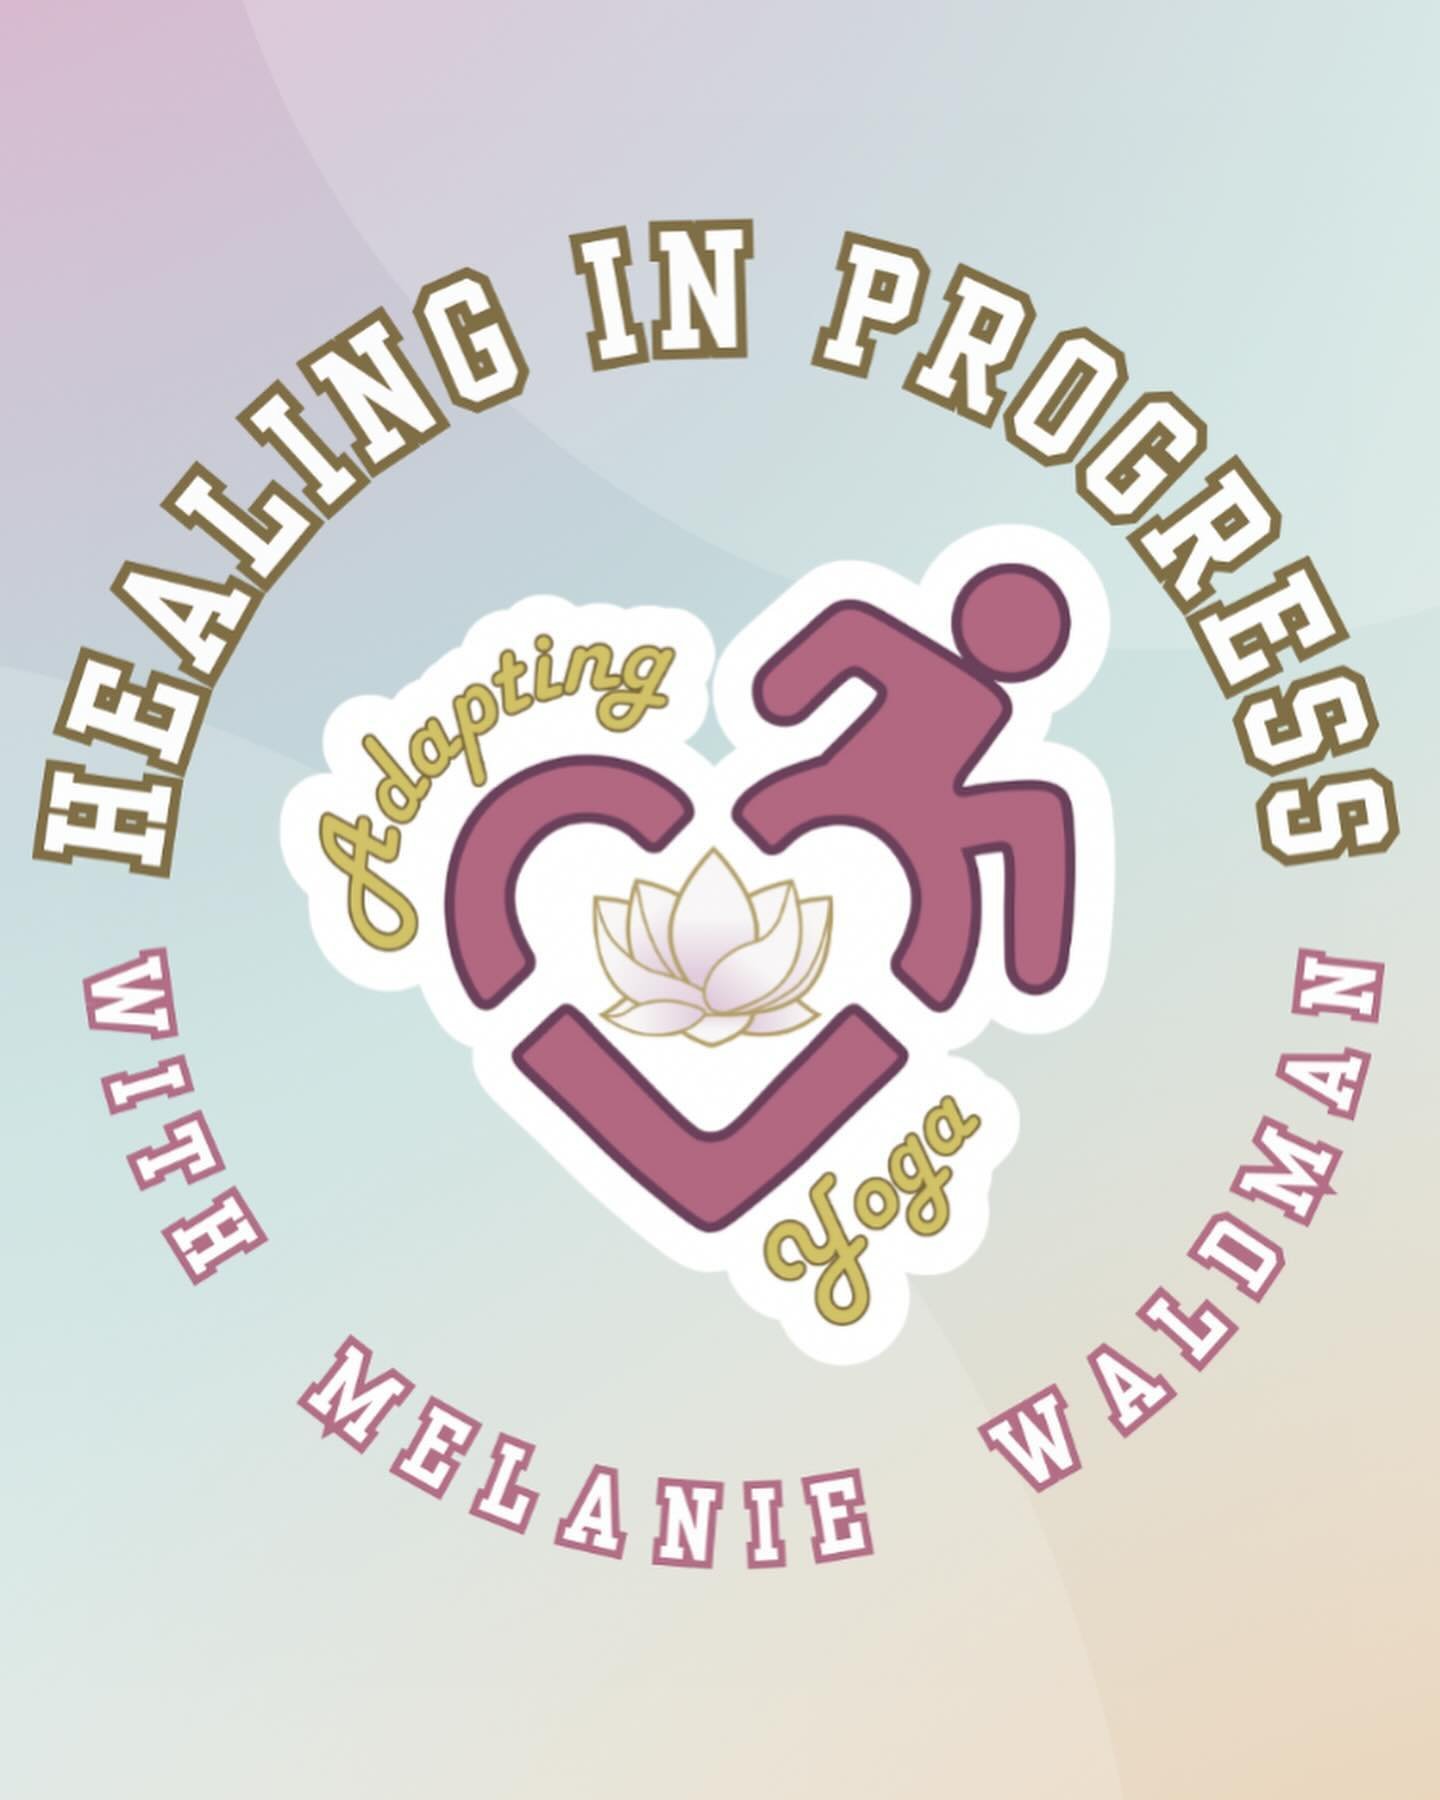 ✨NEW design uploaded to my @bonfire page! &ldquo;Healing in Progress&rdquo; because every little step towards knowing ourselves better, brings us closer to that inner-peace we CRAVE. ✌🏼

May 19th @zenlandingwellness is our next in person workshop! R